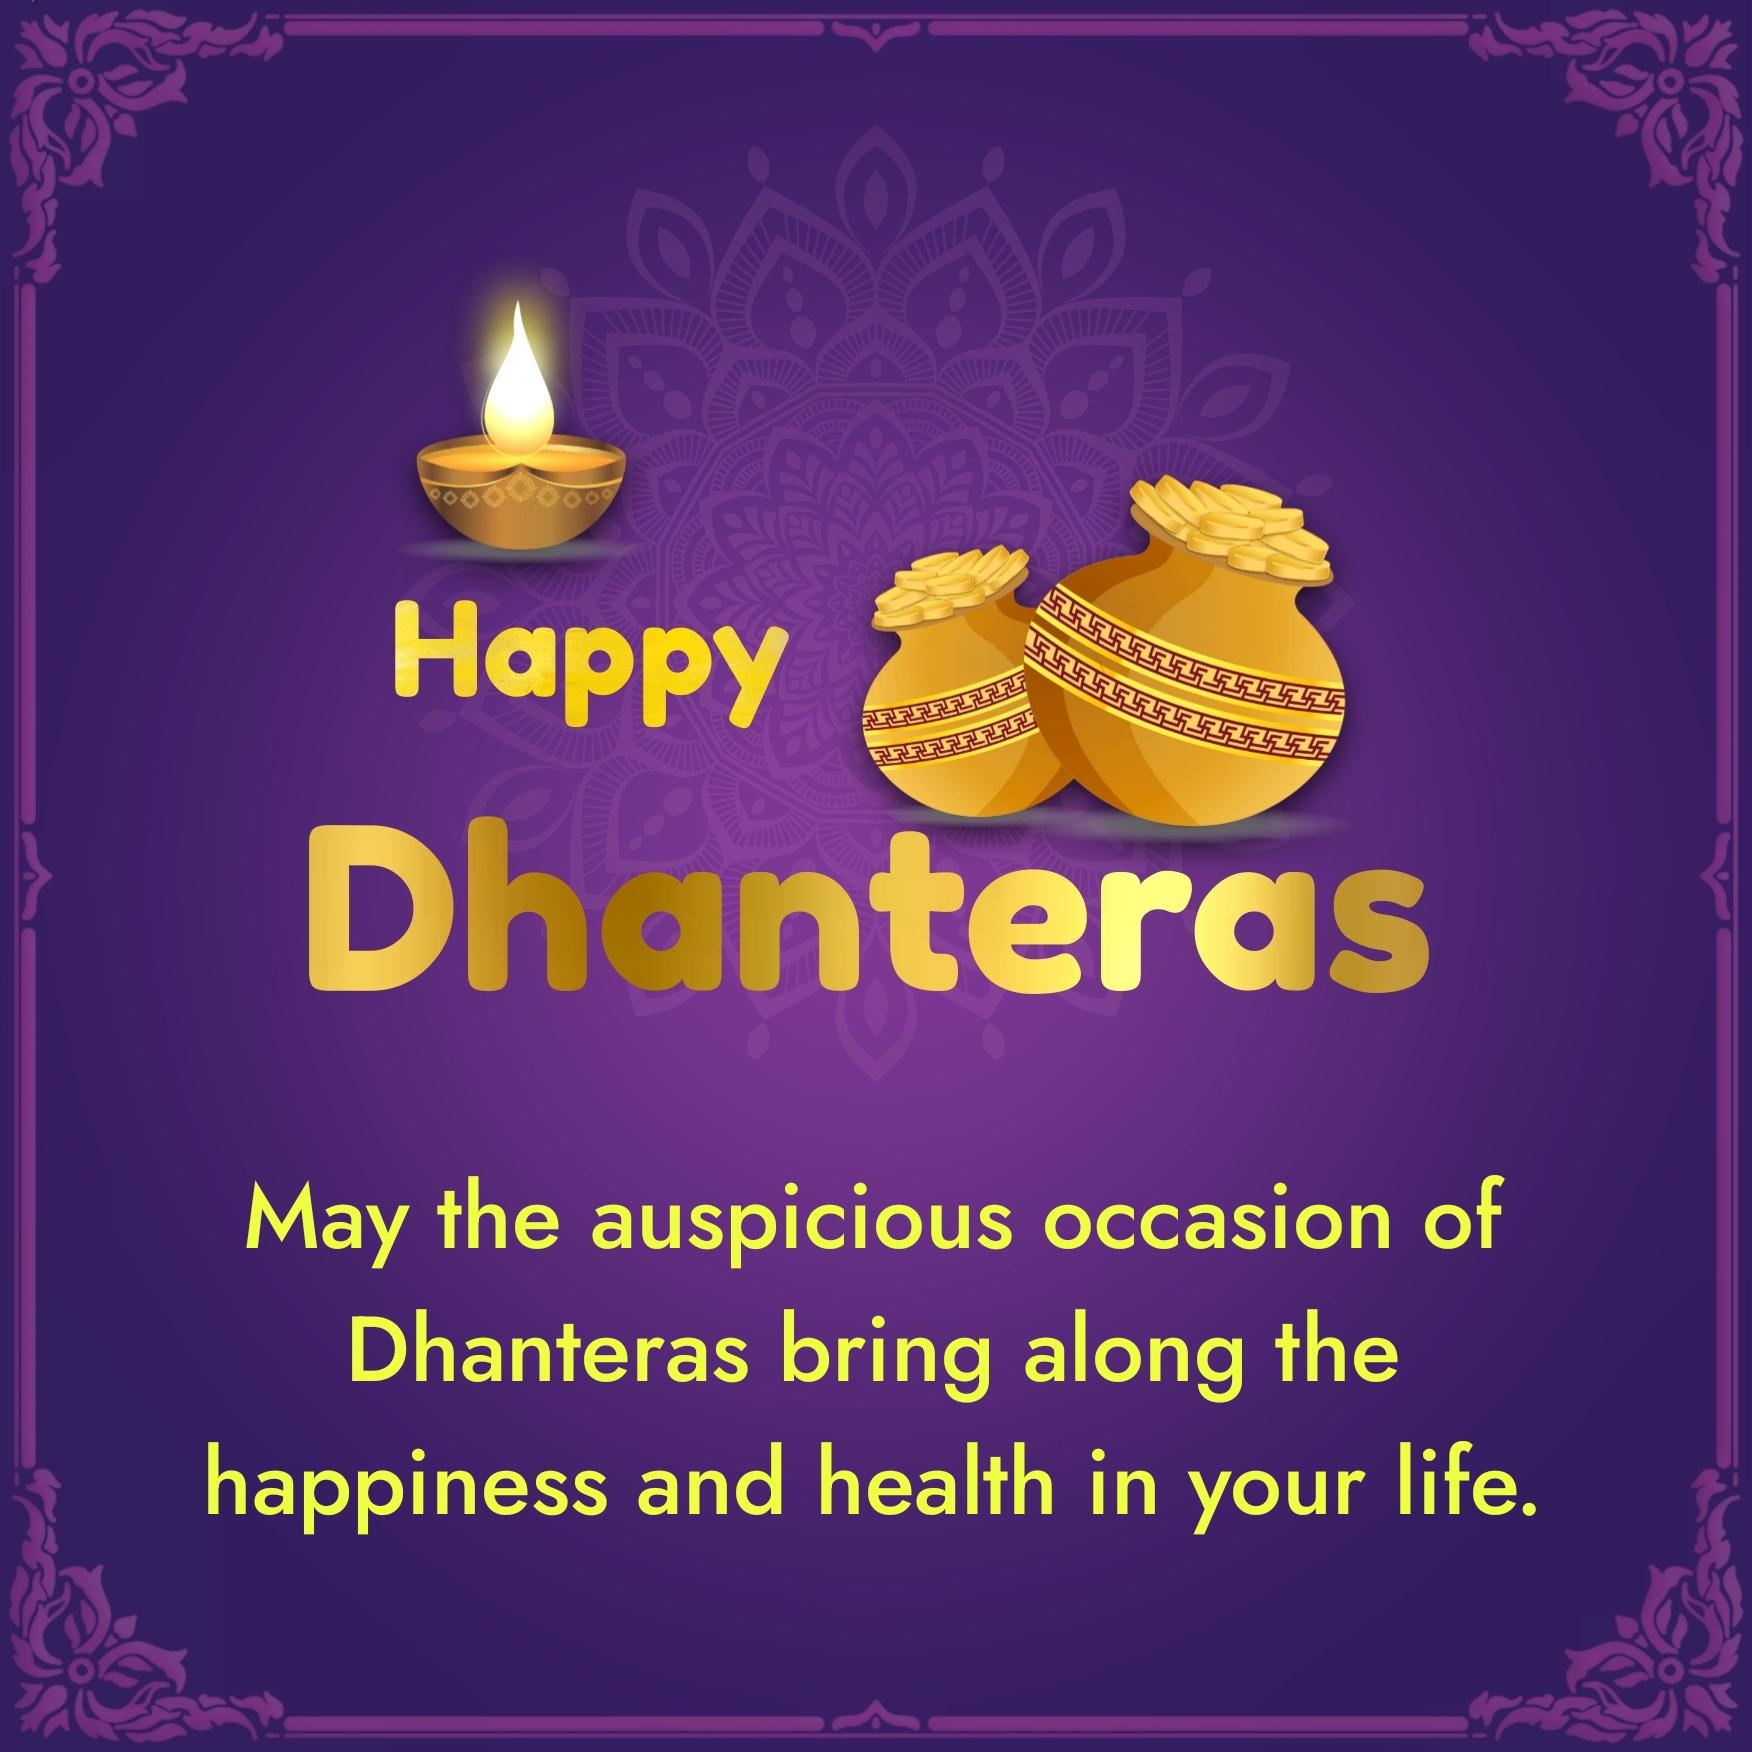 May the auspicious occasion of Dhanteras bring along